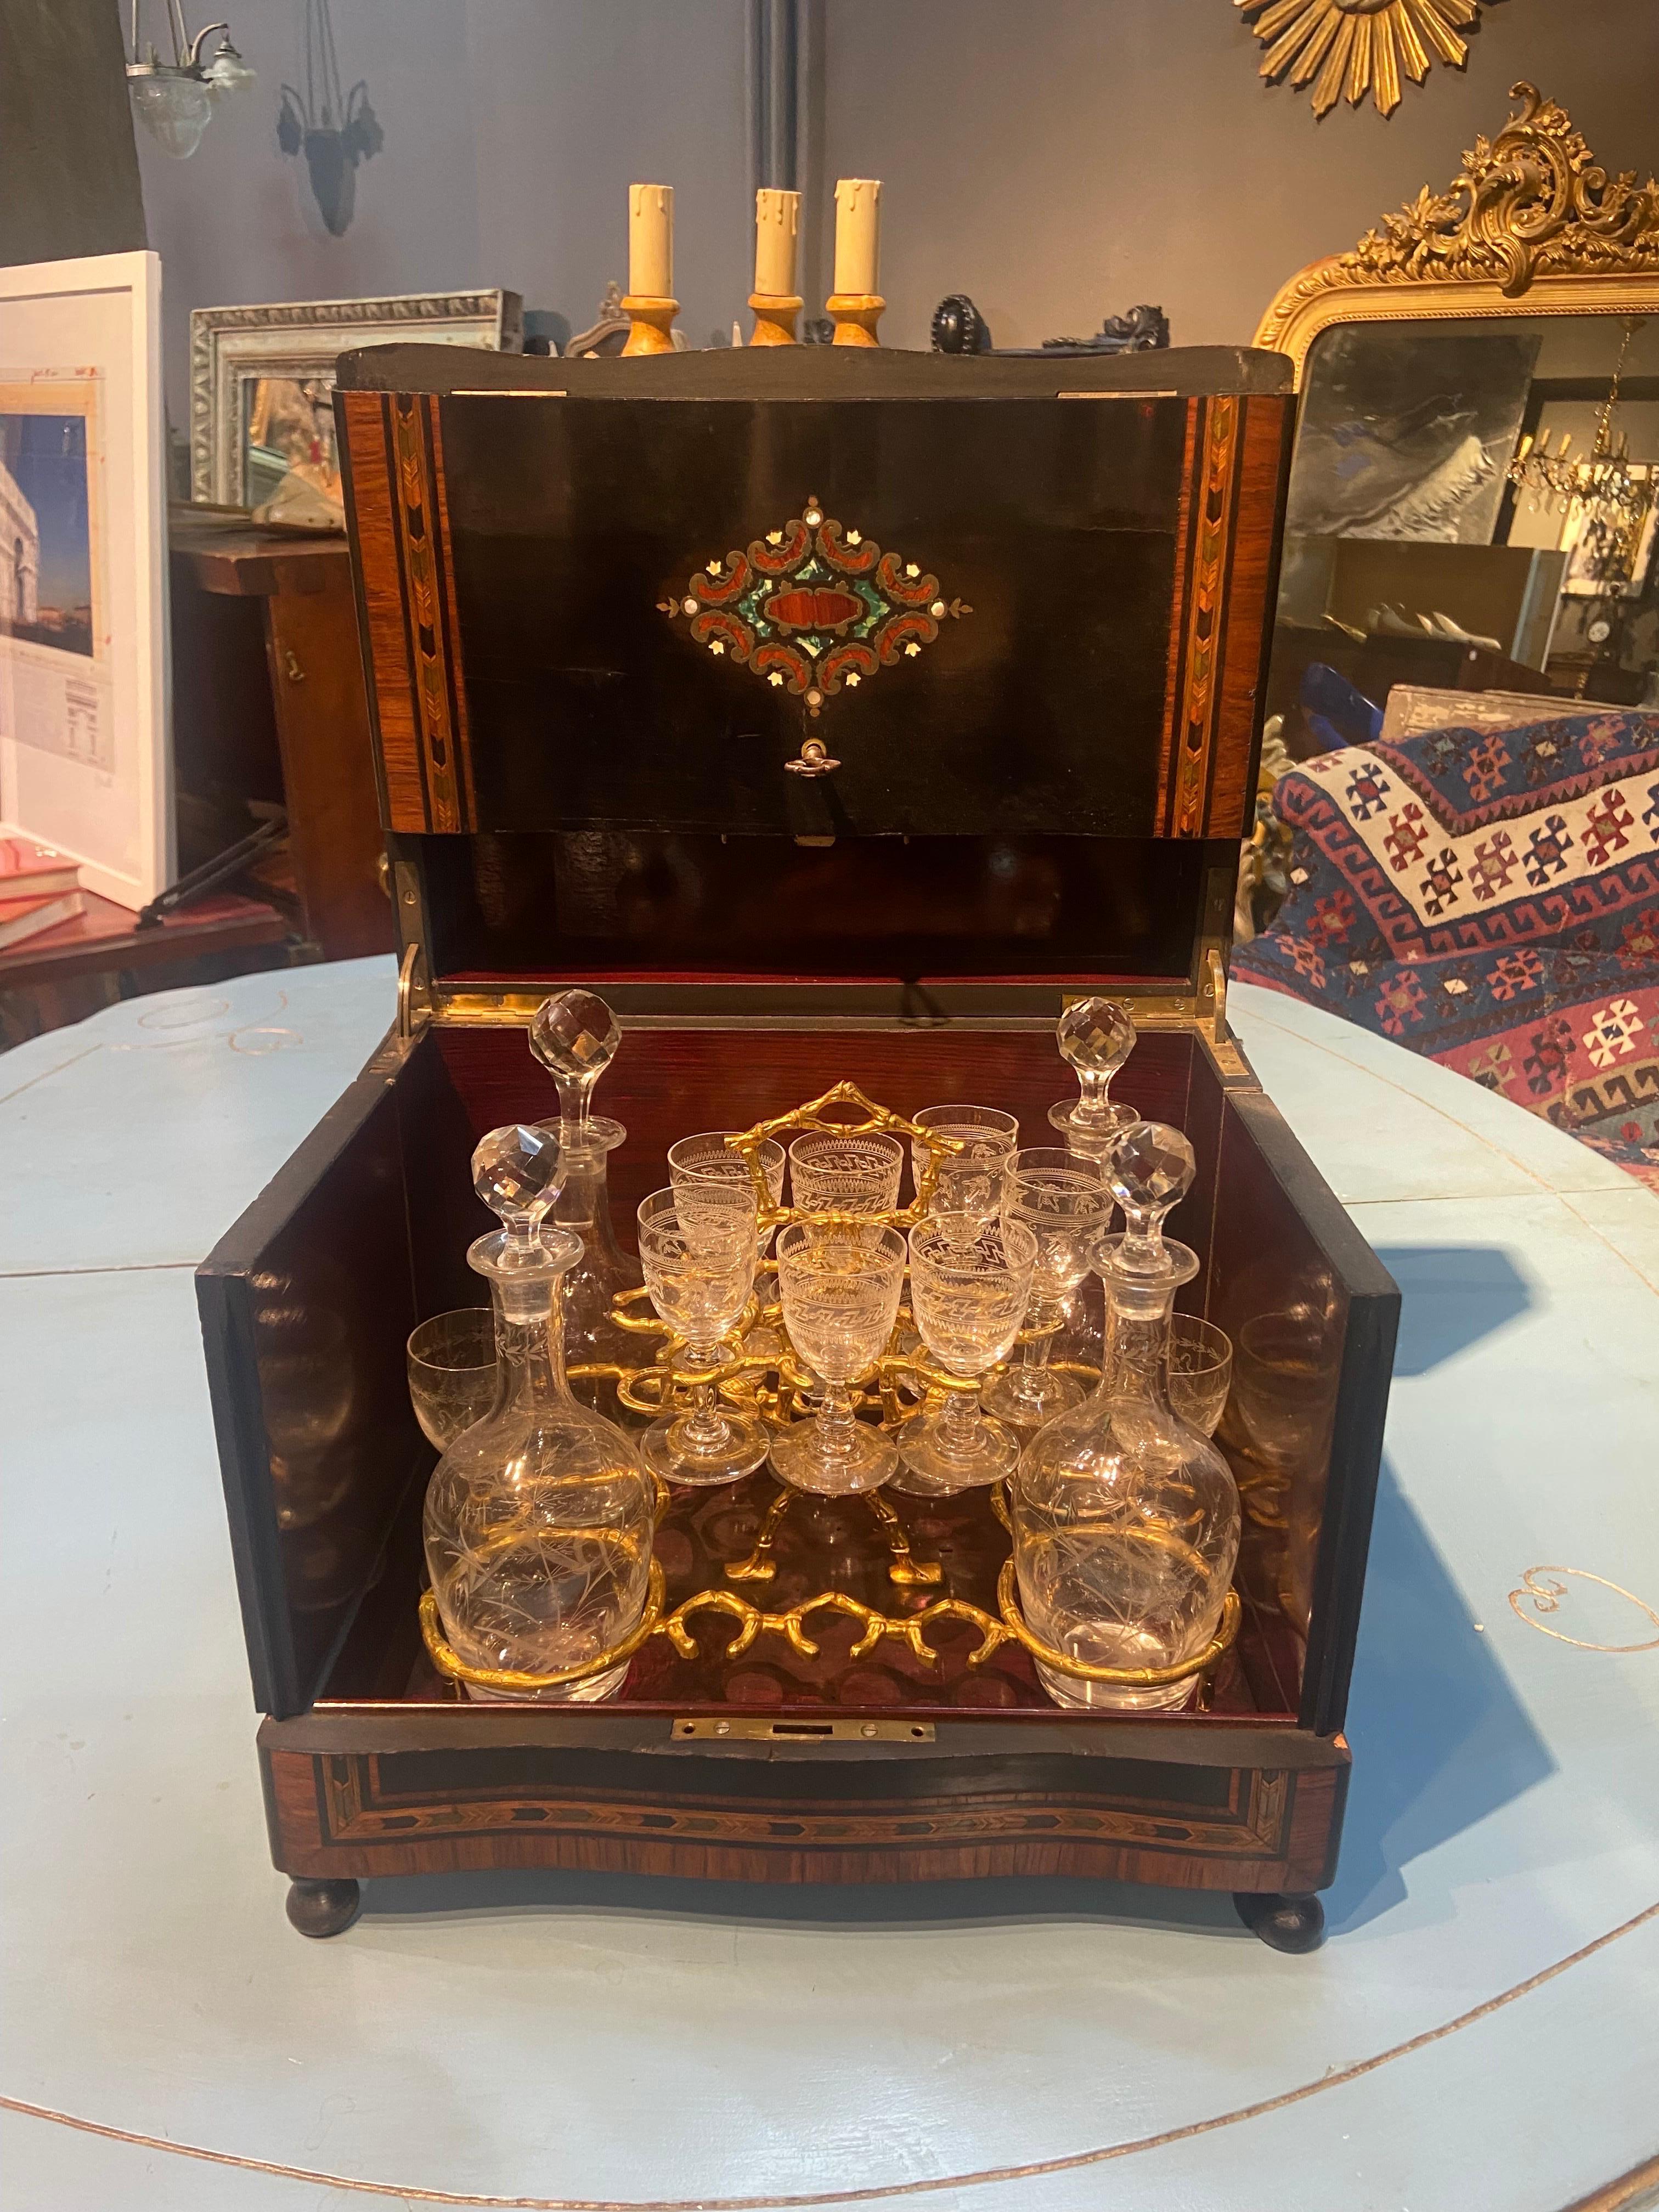 An wooden ebonised and hand-painted liquor cabinet in Napoleon III style with brass inlay. Exterior opens in three directions to elegantly reveal a crystal service surrounded by polished rosewood. It contains four crystal carafes with stoppers and